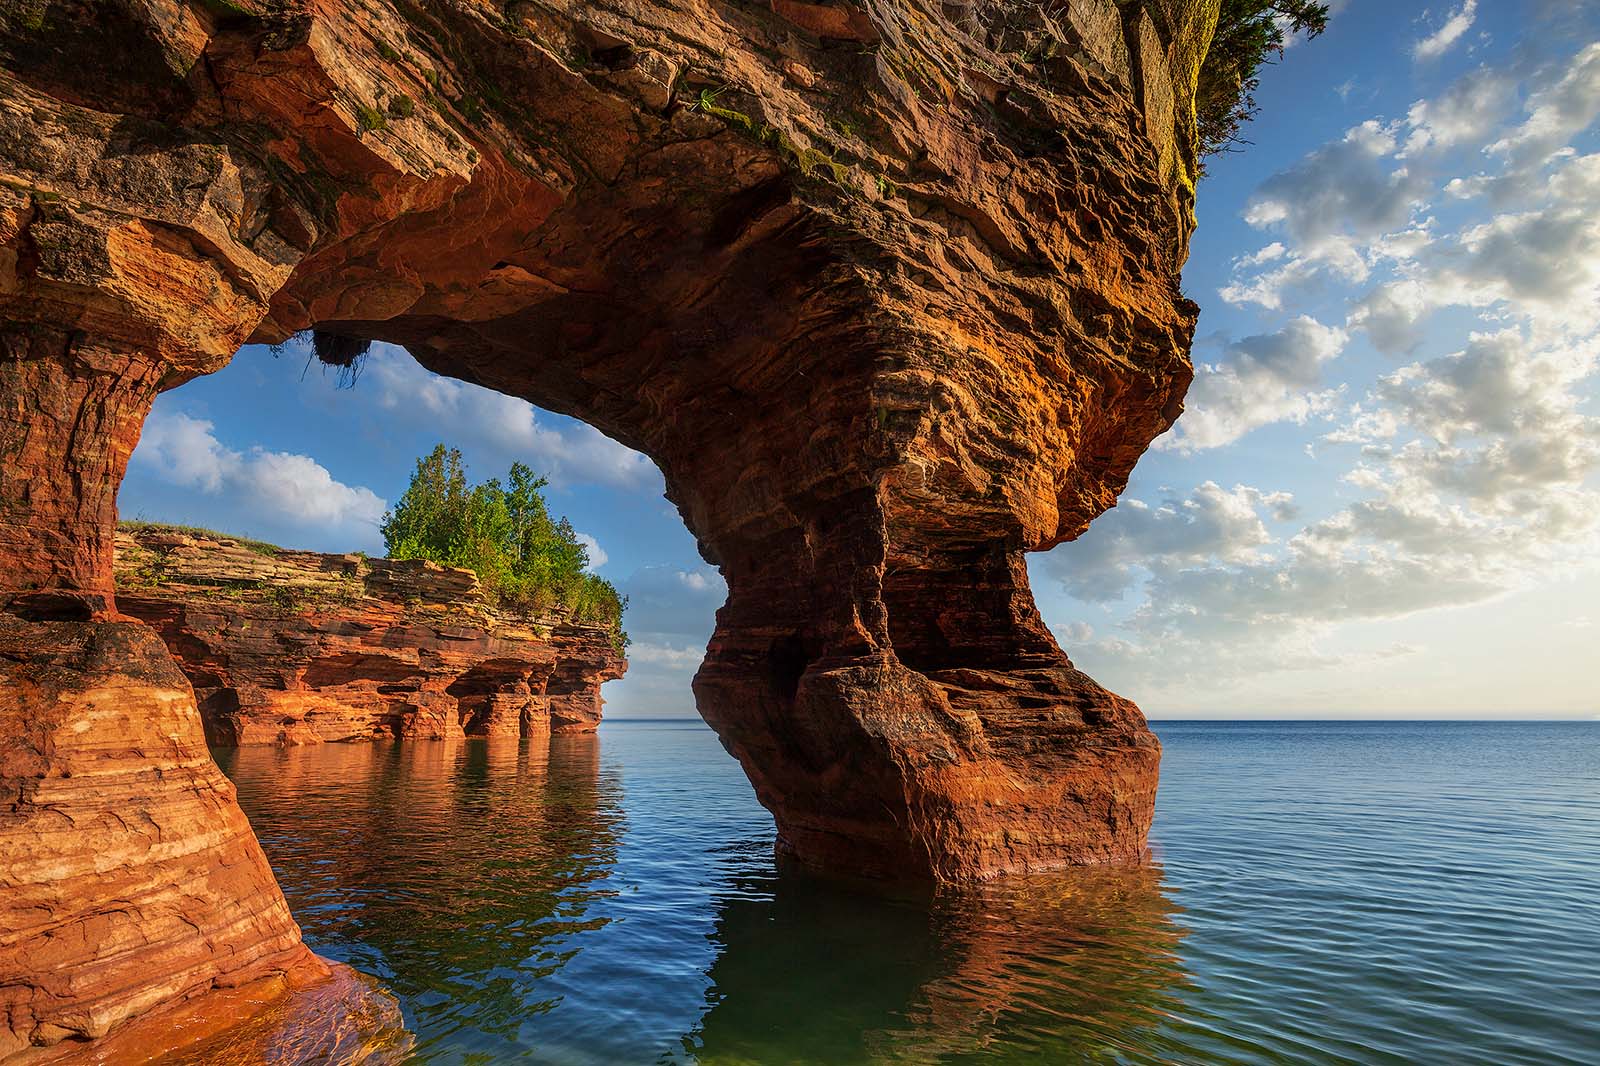 sandstone arch on devil's island in the apostle islands national lakeshore on lake superior wisconsin